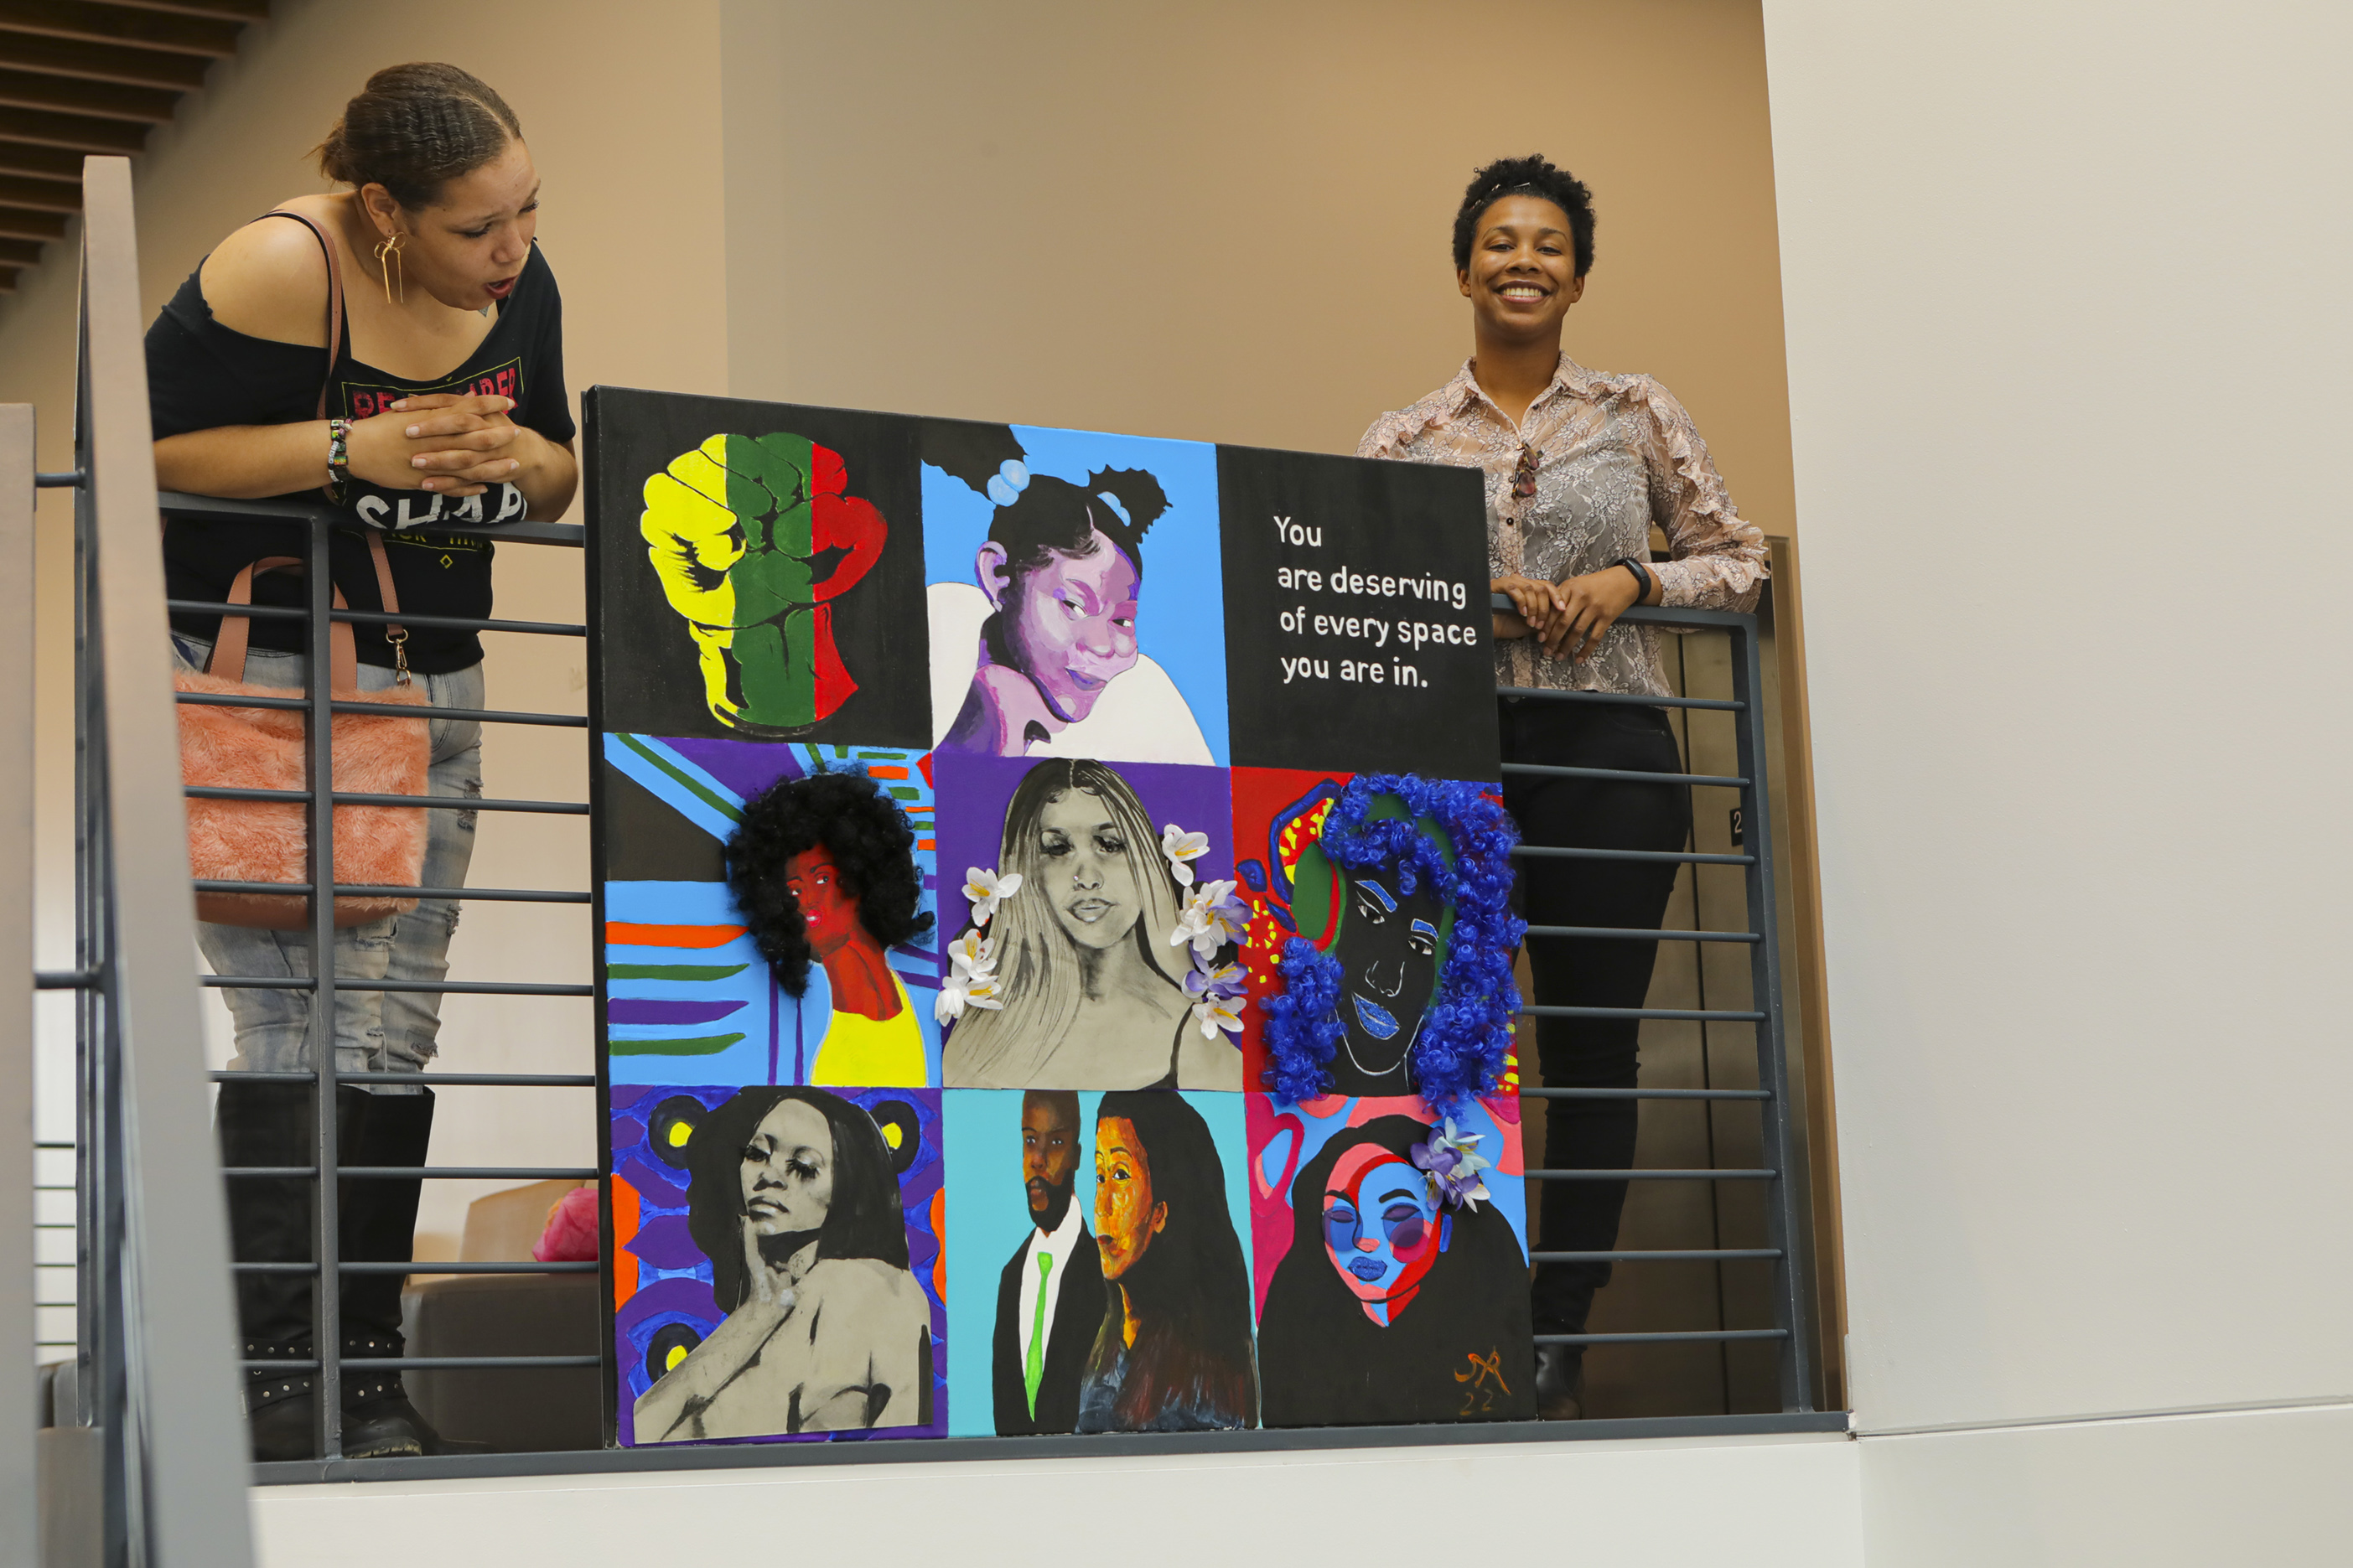 , Columbus State student Le'Ken Stokes, on the left, helps local artist Simone Robinson as she unveils her new artwork in the lobby of Mitchell Hall on April 12